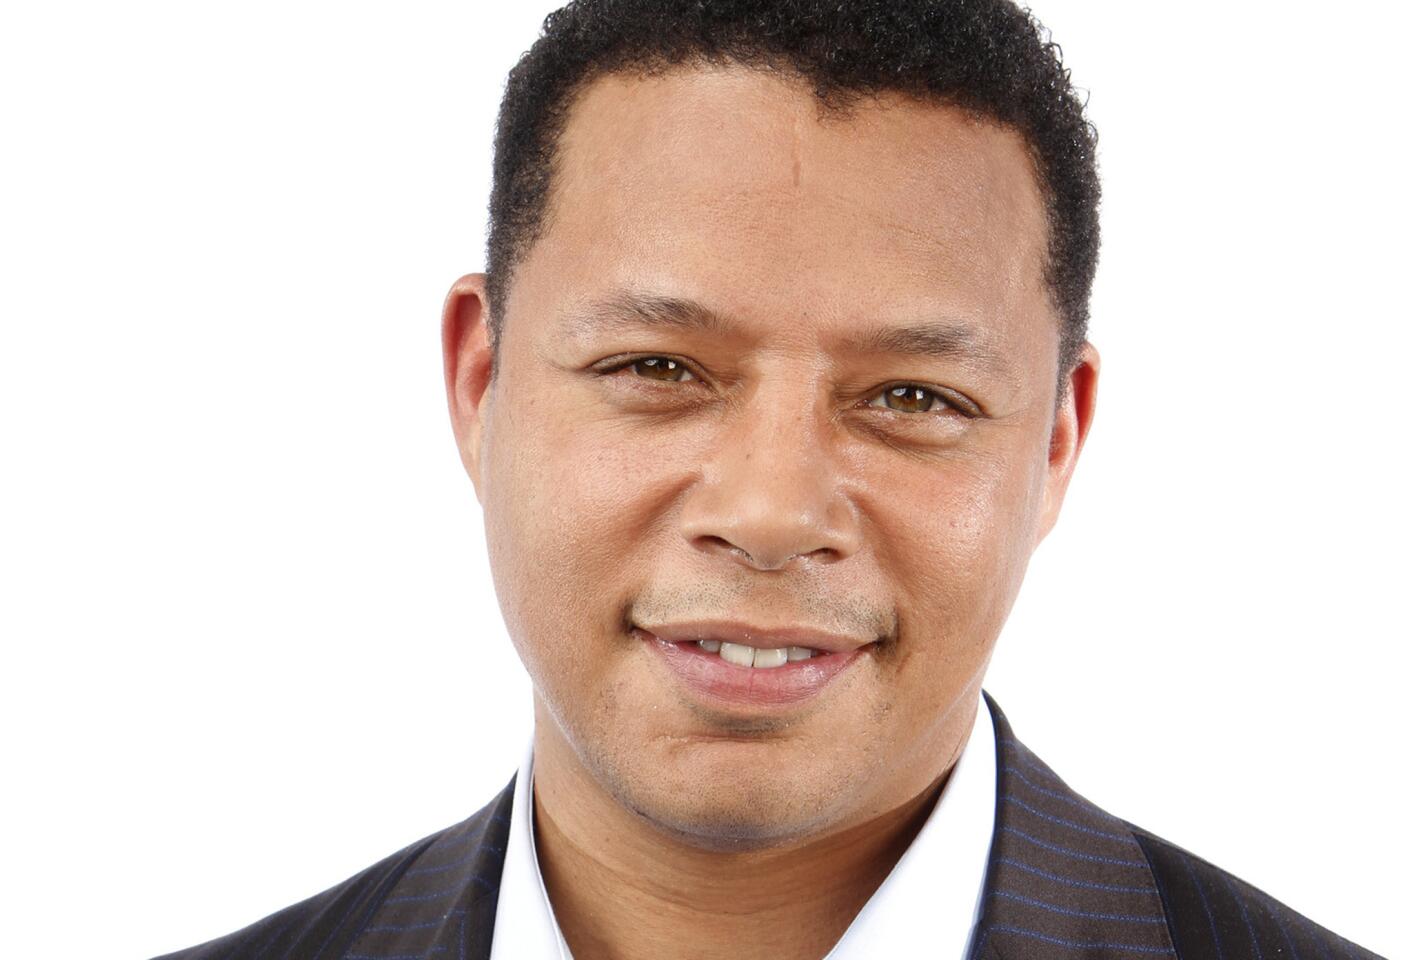 Actor Terrence Howard, 2001, 2011 and 2013